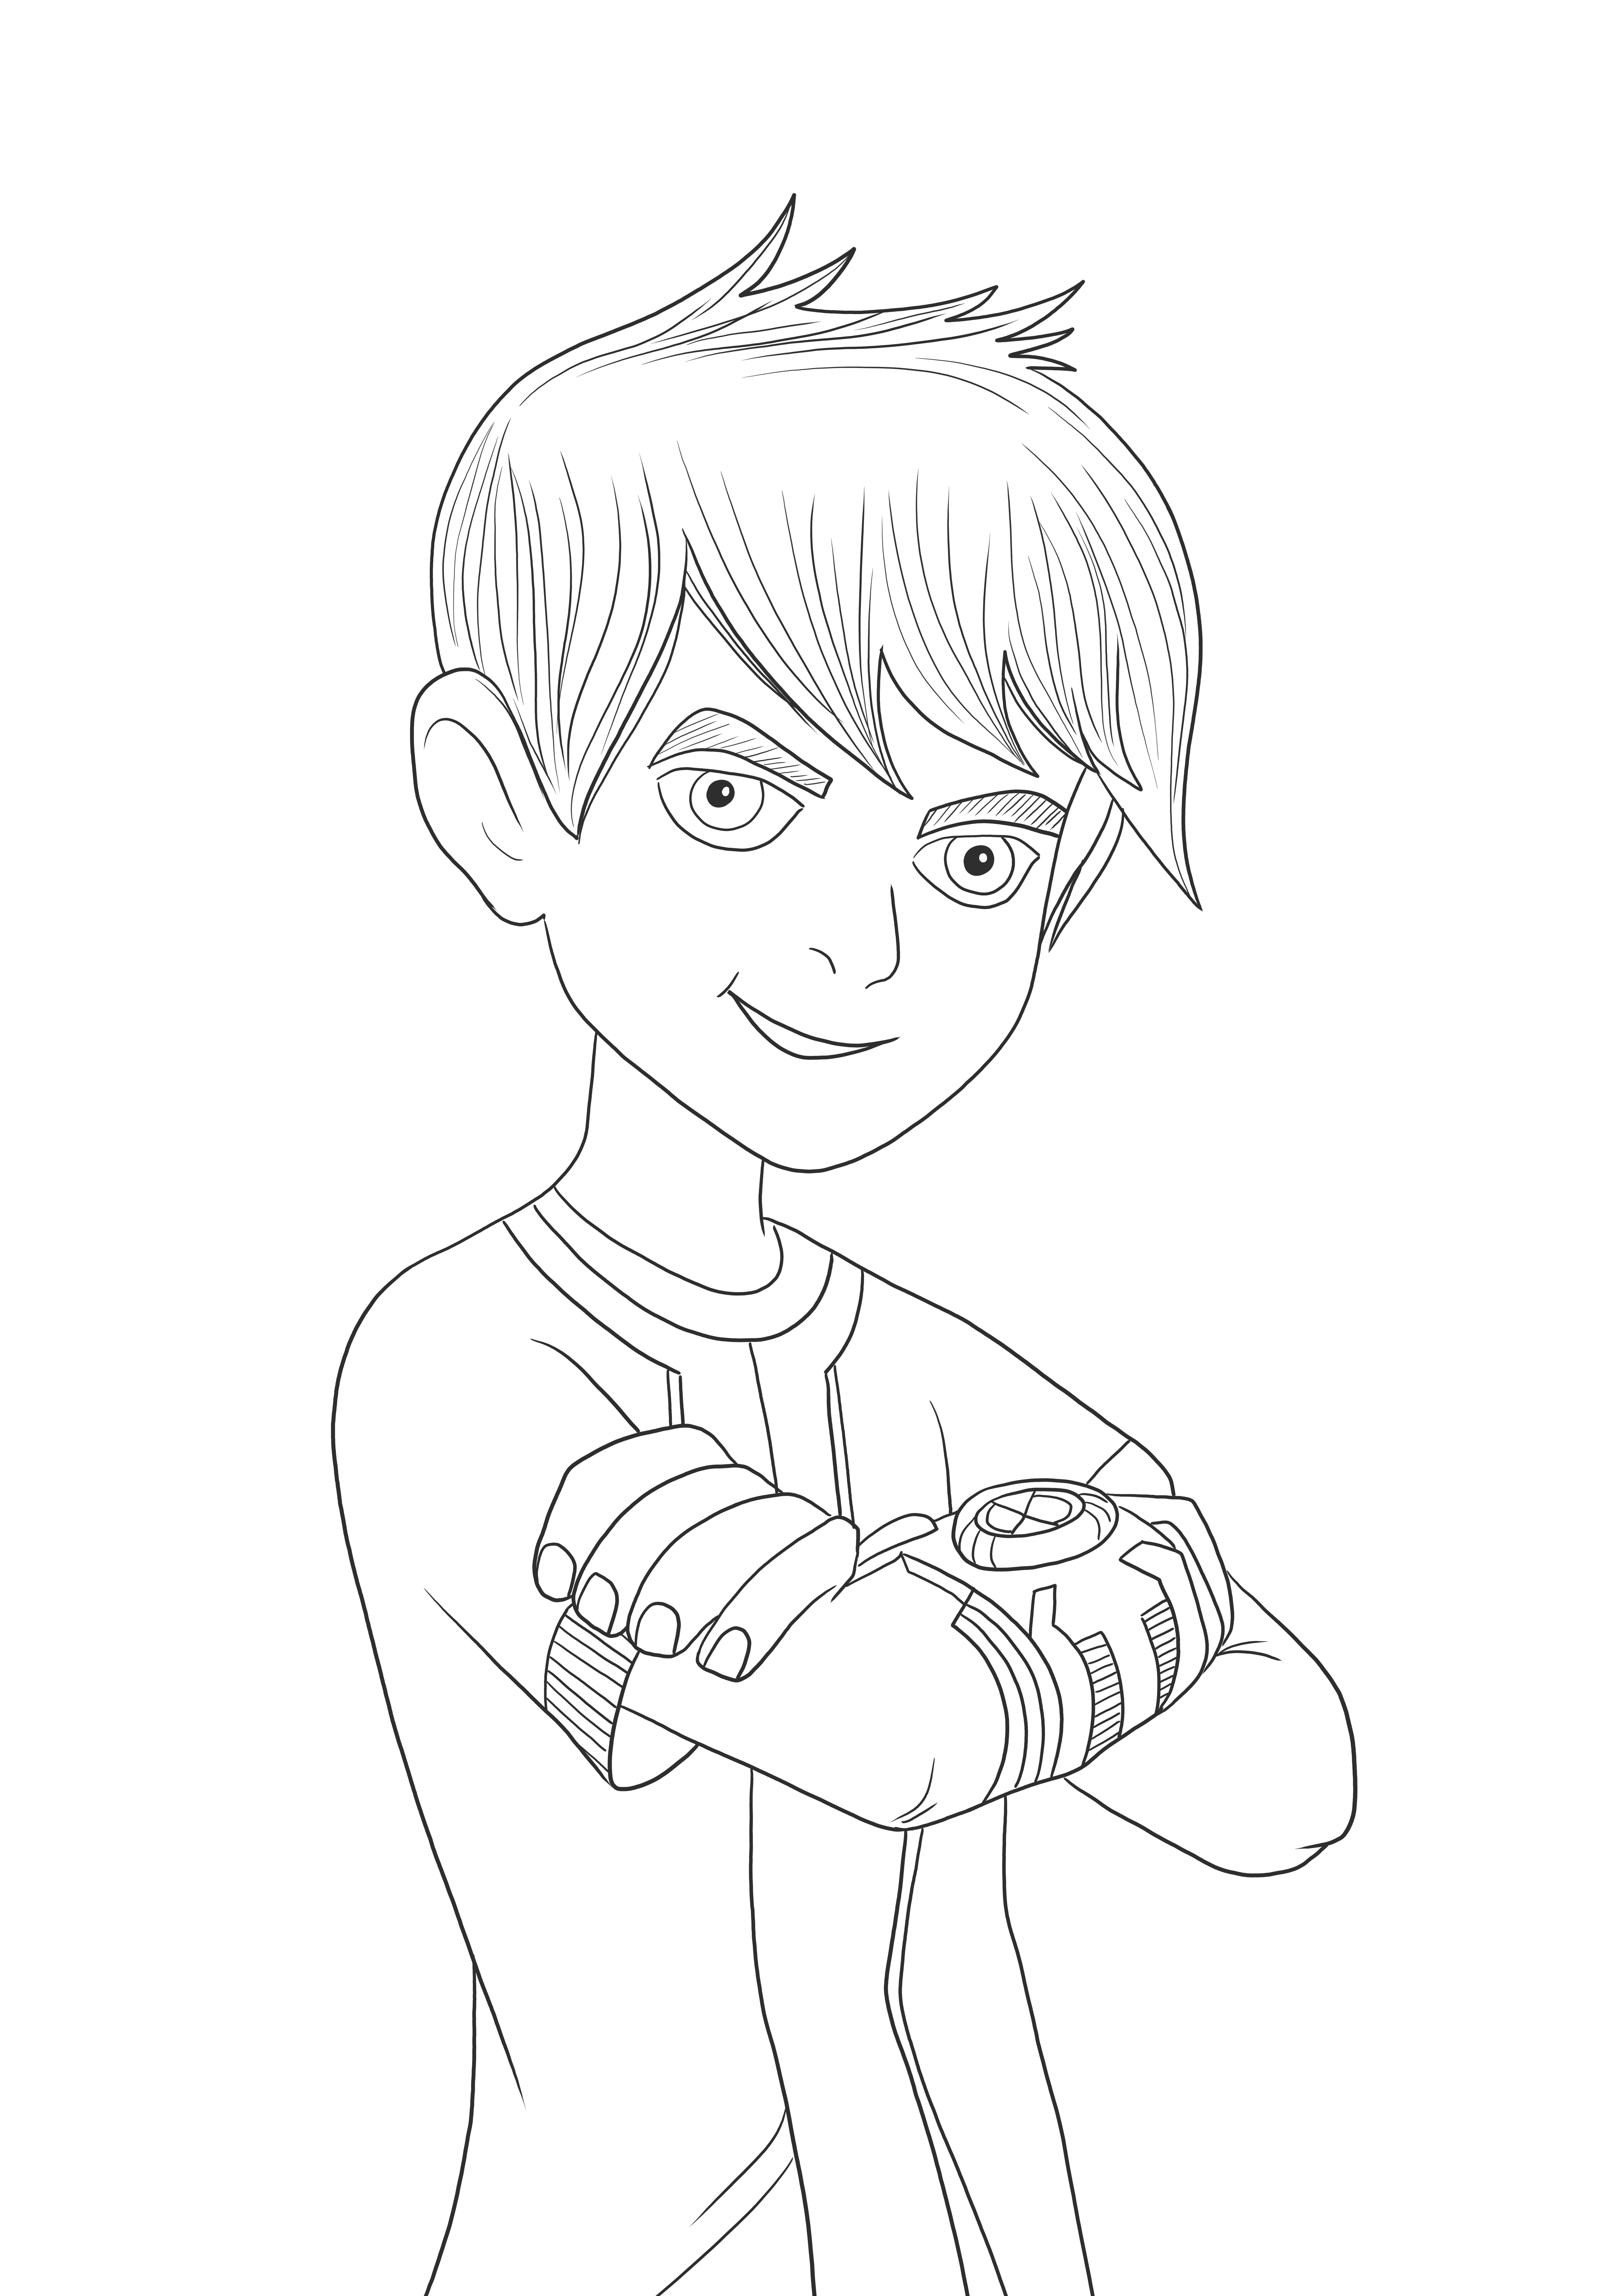 Ben 10 with his Omnitrix image ready to be printed for free and colored